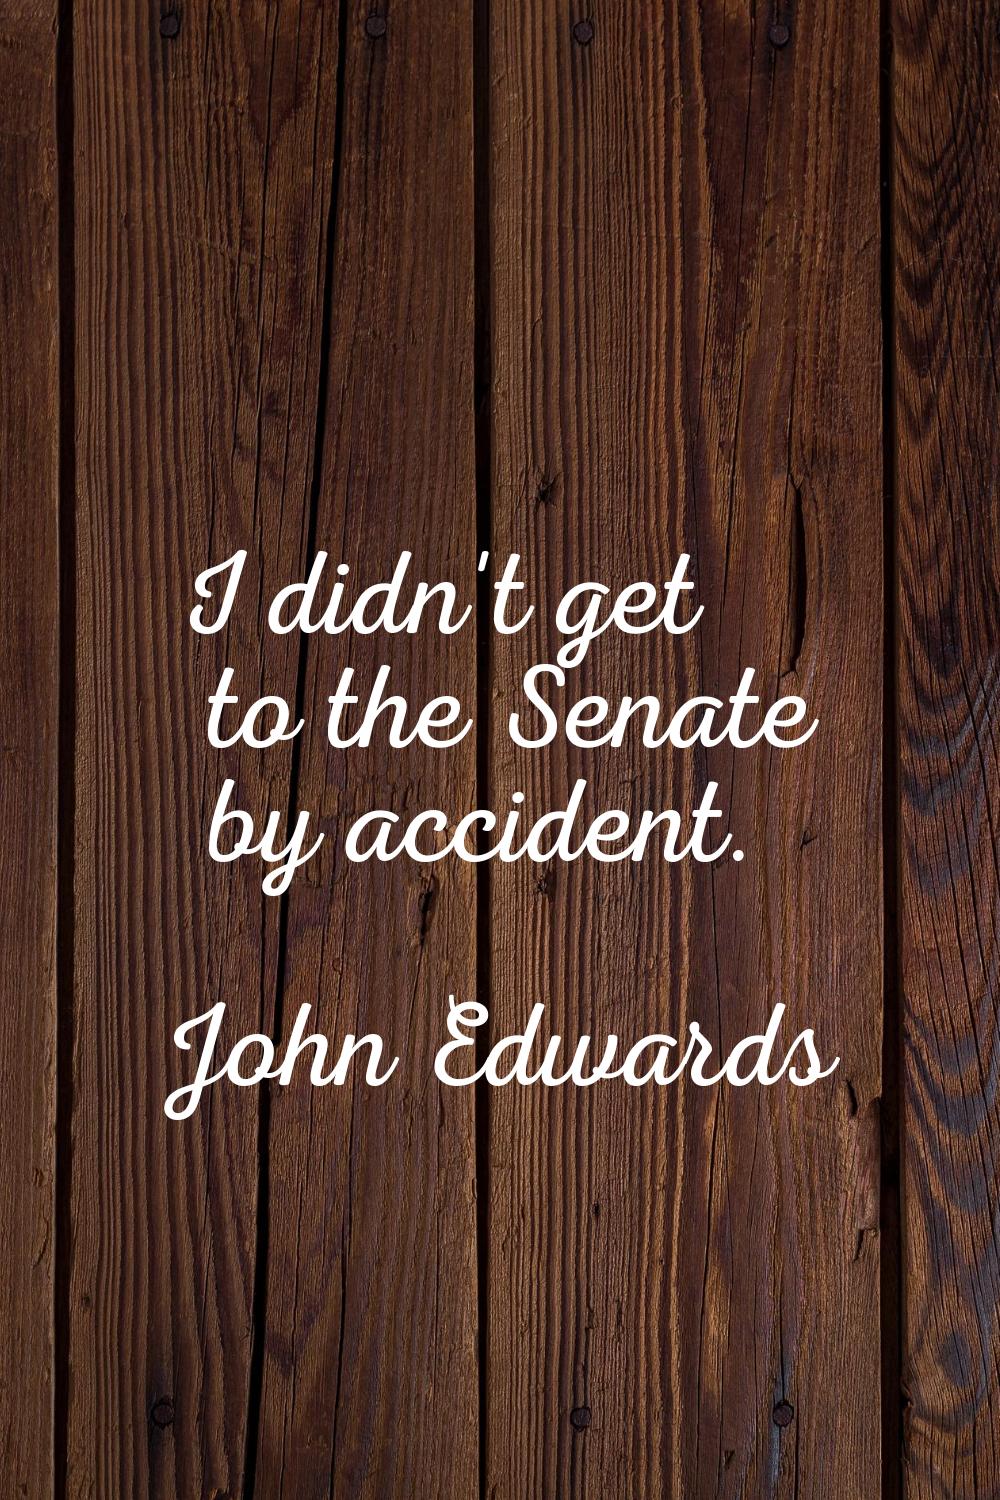 I didn't get to the Senate by accident.